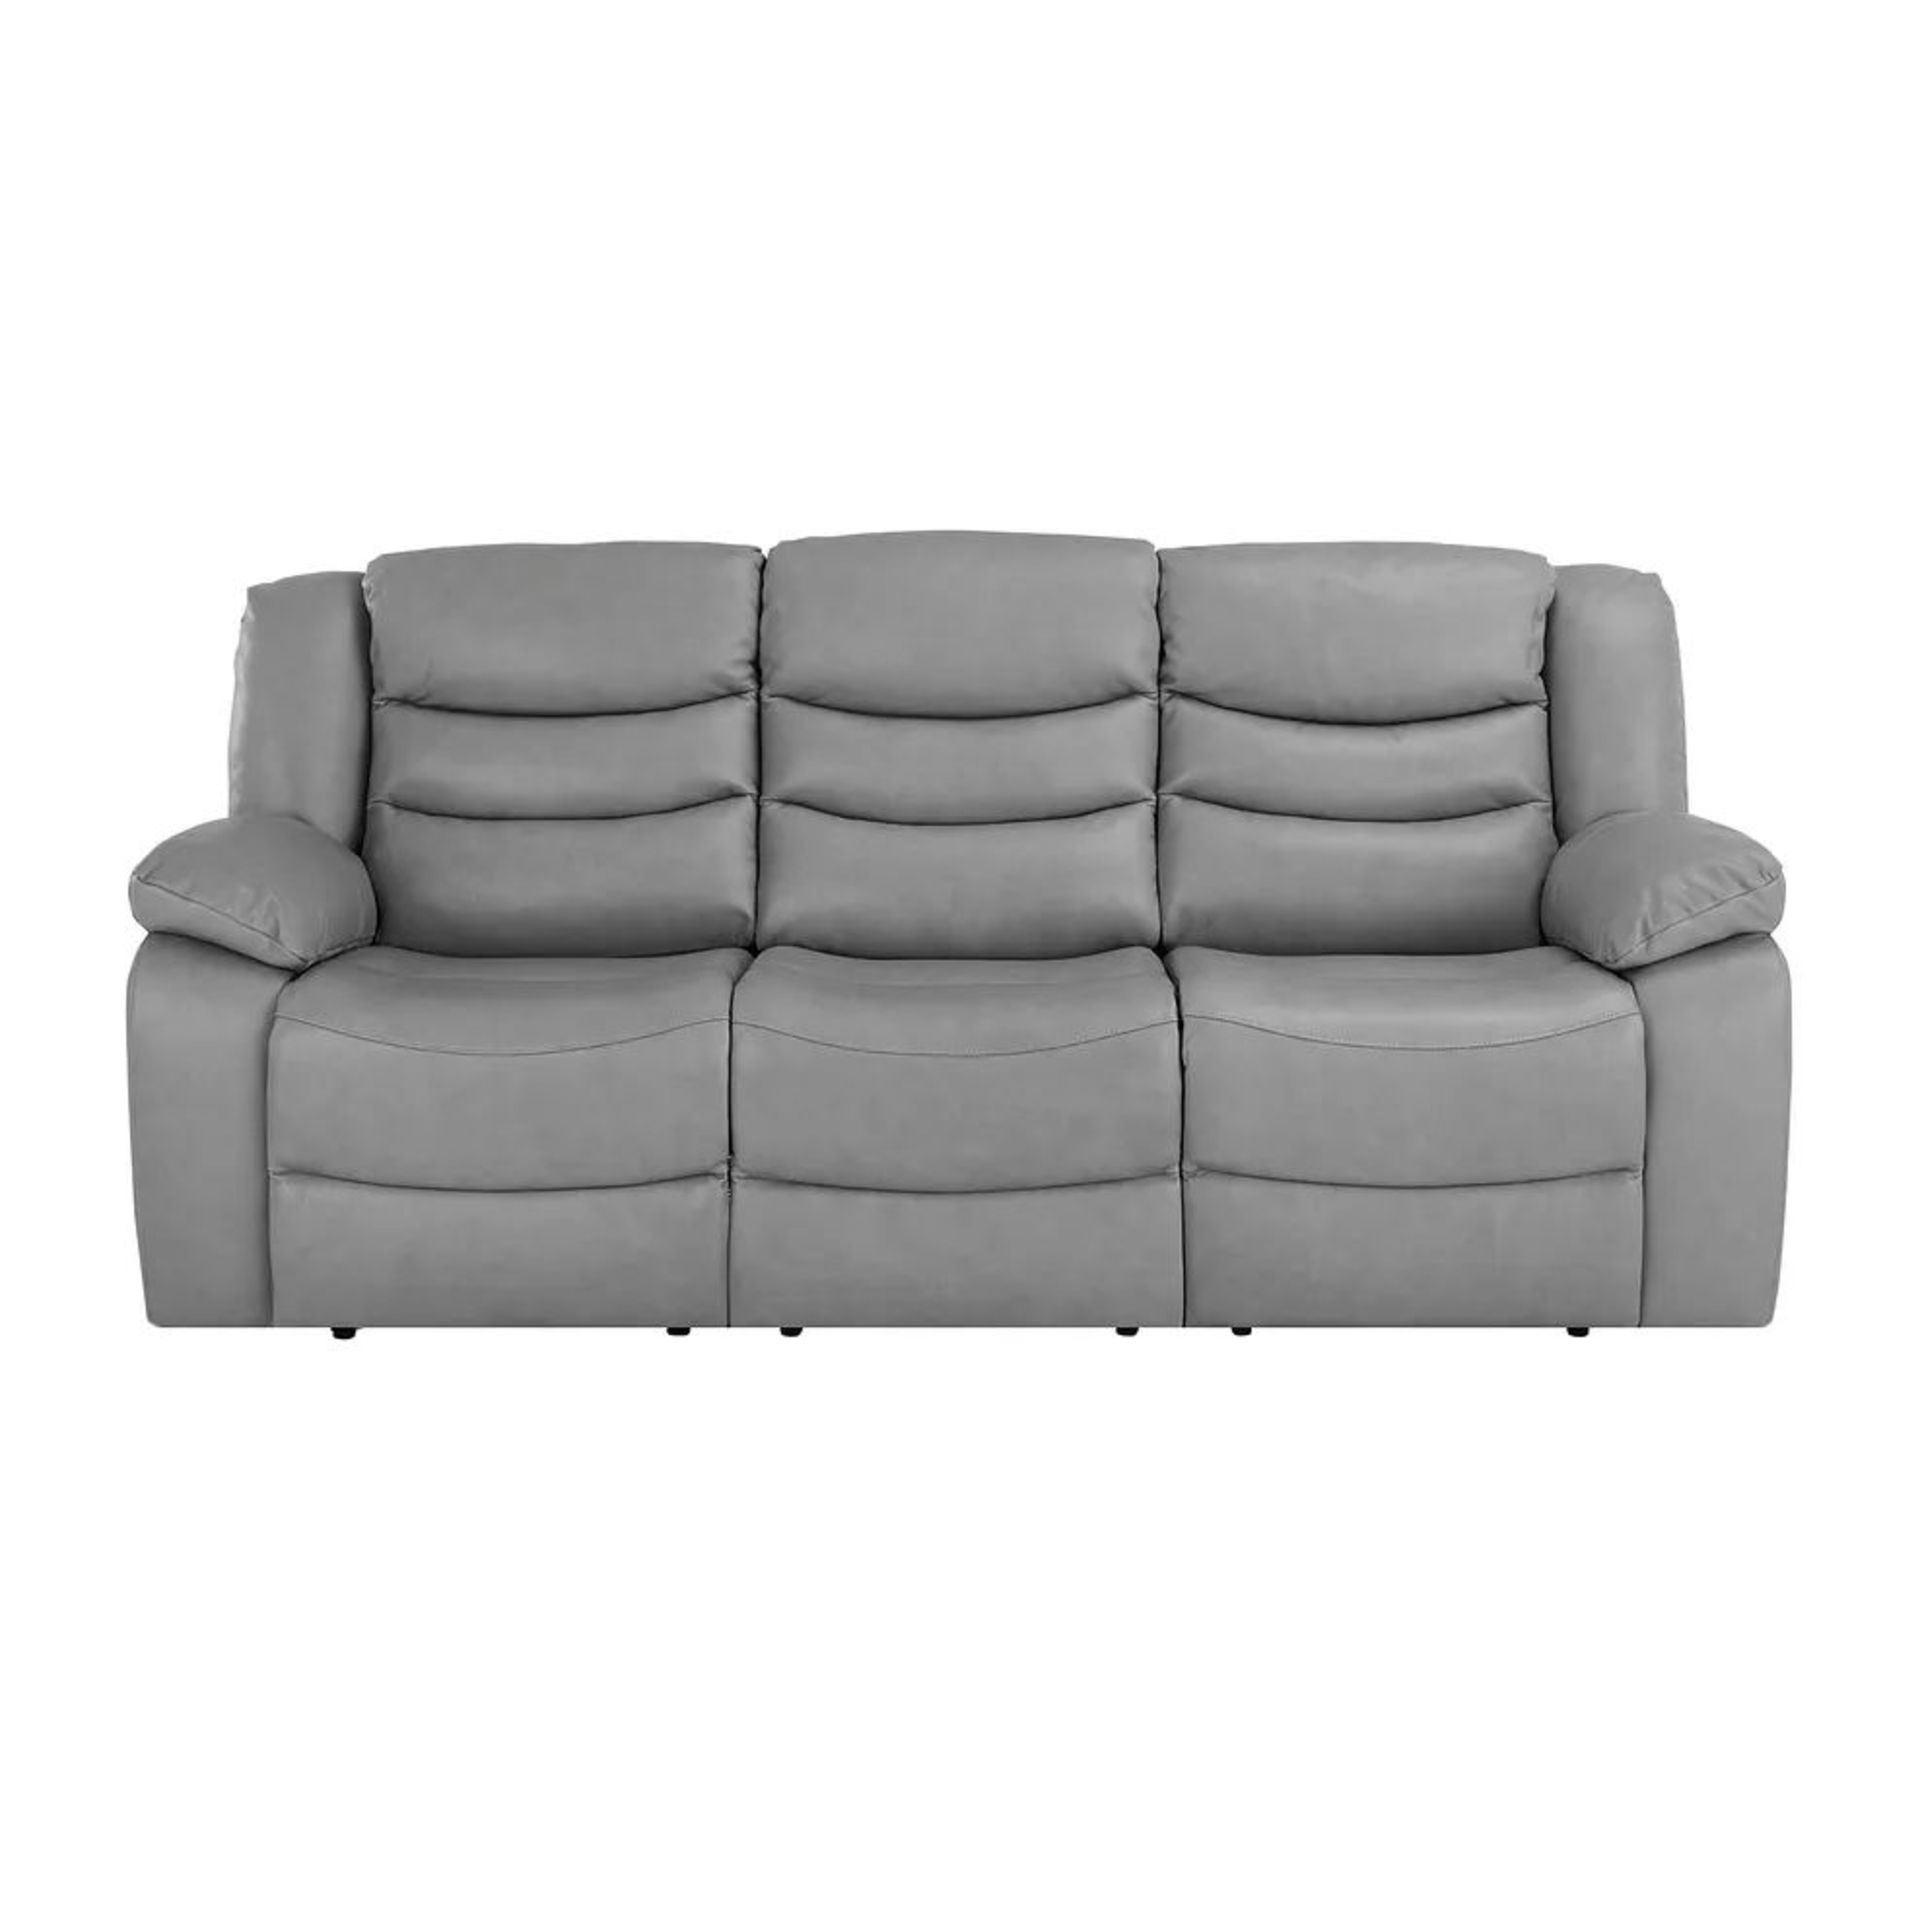 BRAND NEW MARLOW 3 Seater Sofa - LIGHT GREY LEATHER. RRP £1599. Our Marlow leather sofa range is a - Image 2 of 8